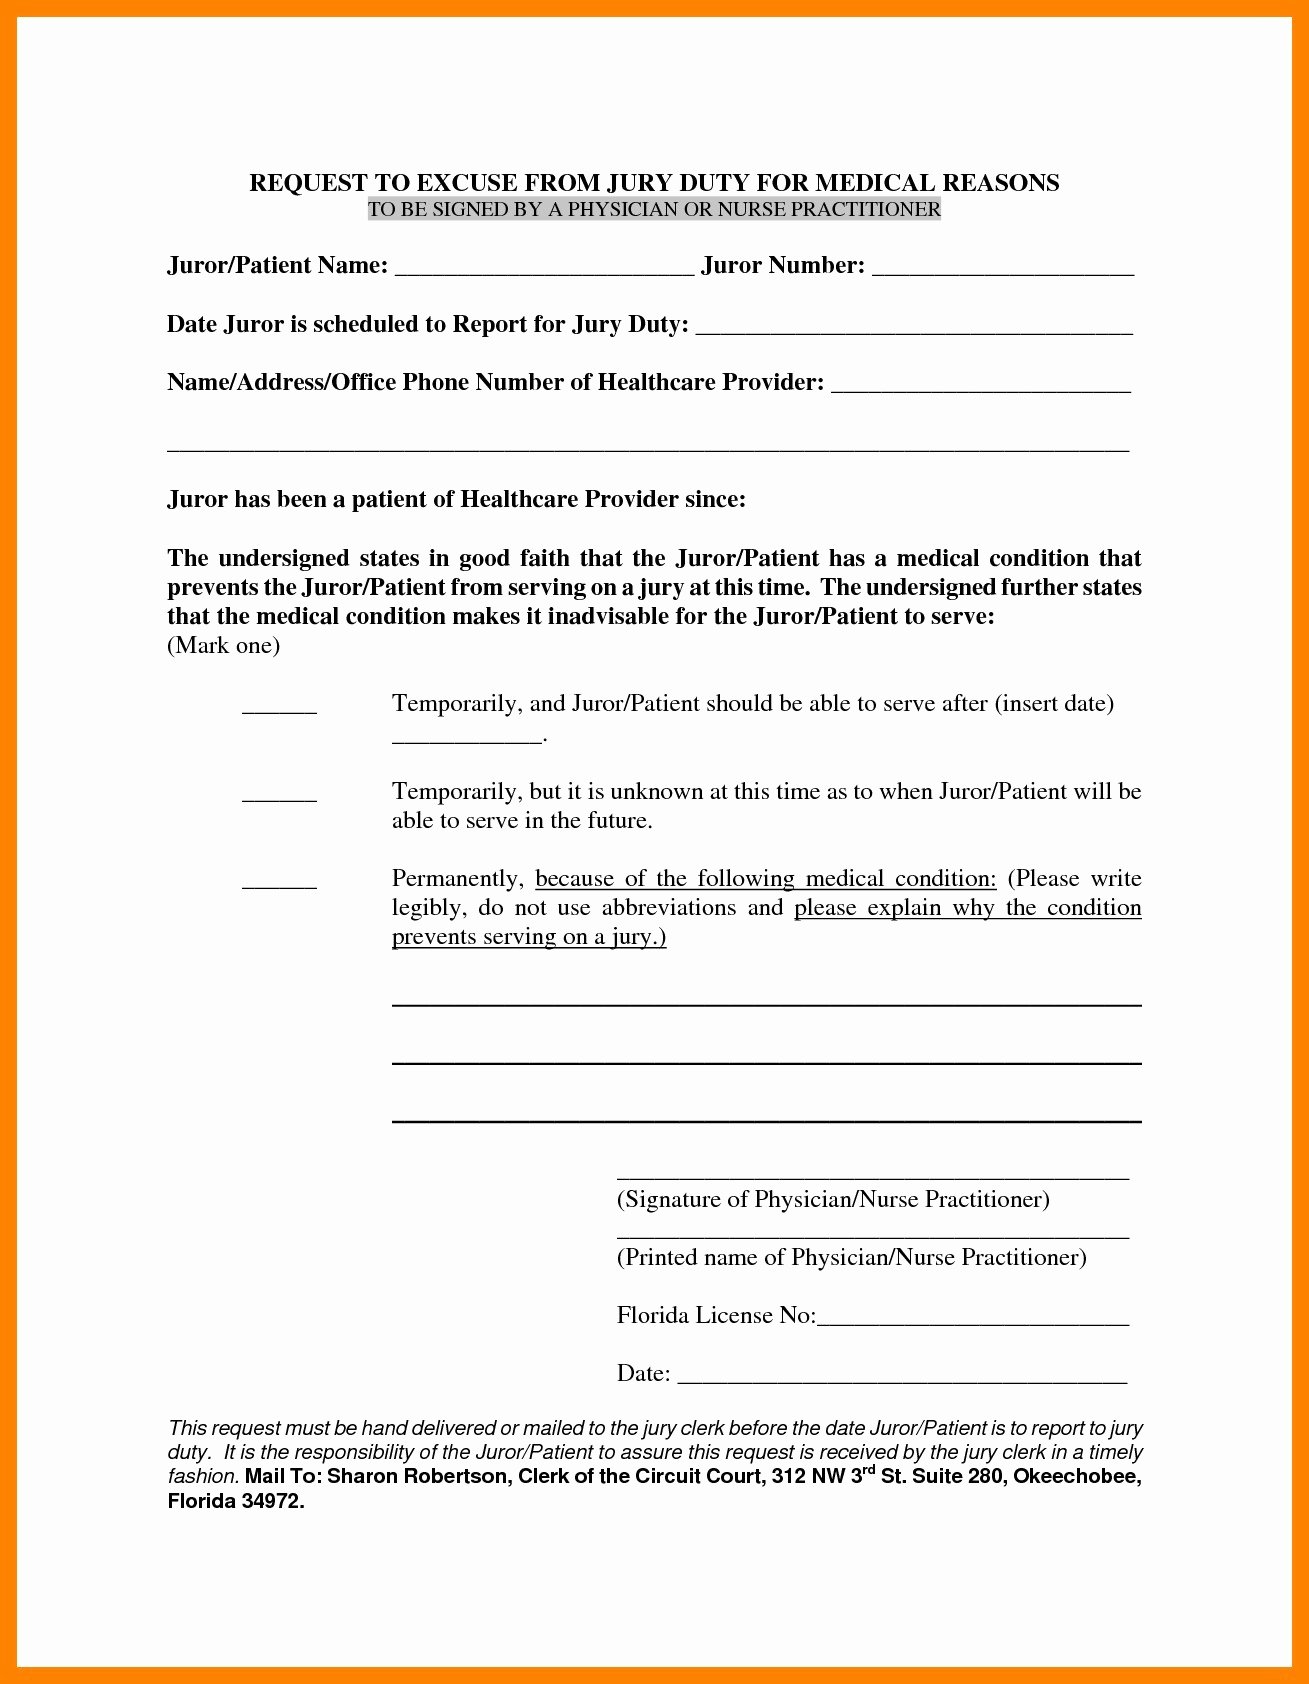 Jury Duty Letter Of Excuse From Employer Sample Fresh Jury Duty Medical Excuse Letter Template Samples